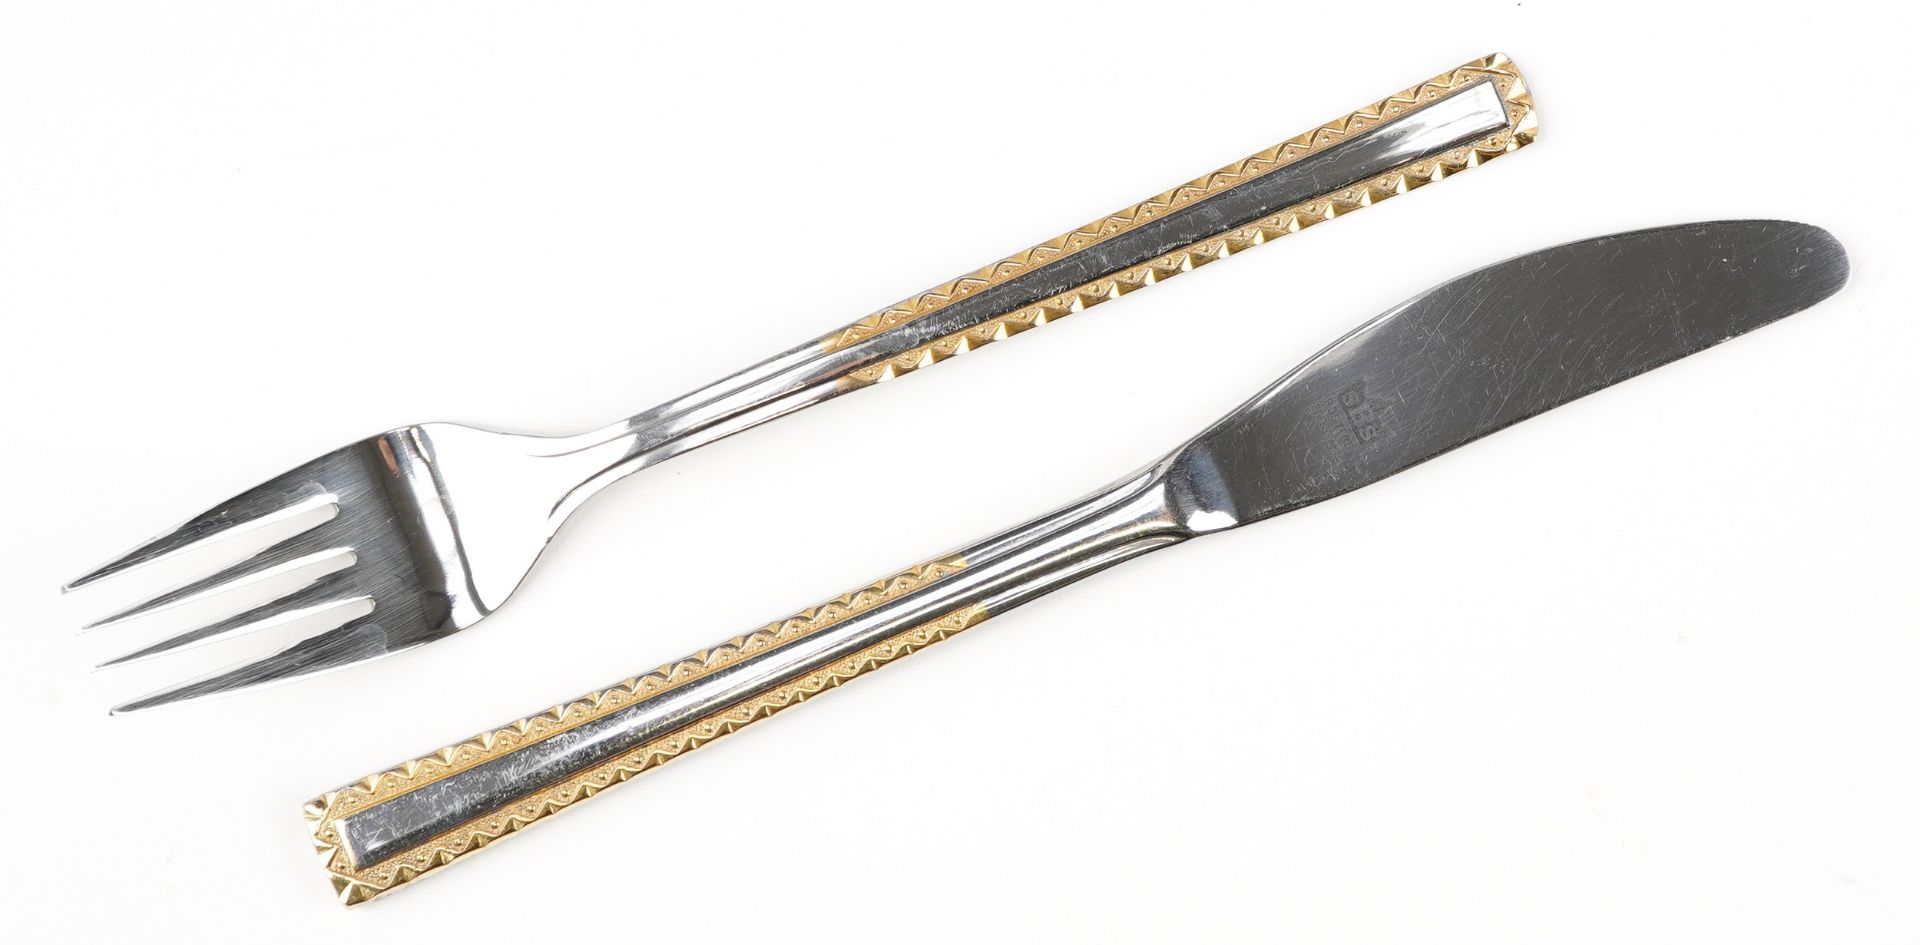 Bestecke Solingen canteen of gold plated chrome nickel steel cutlery, 44cm wide : For further - Image 4 of 7